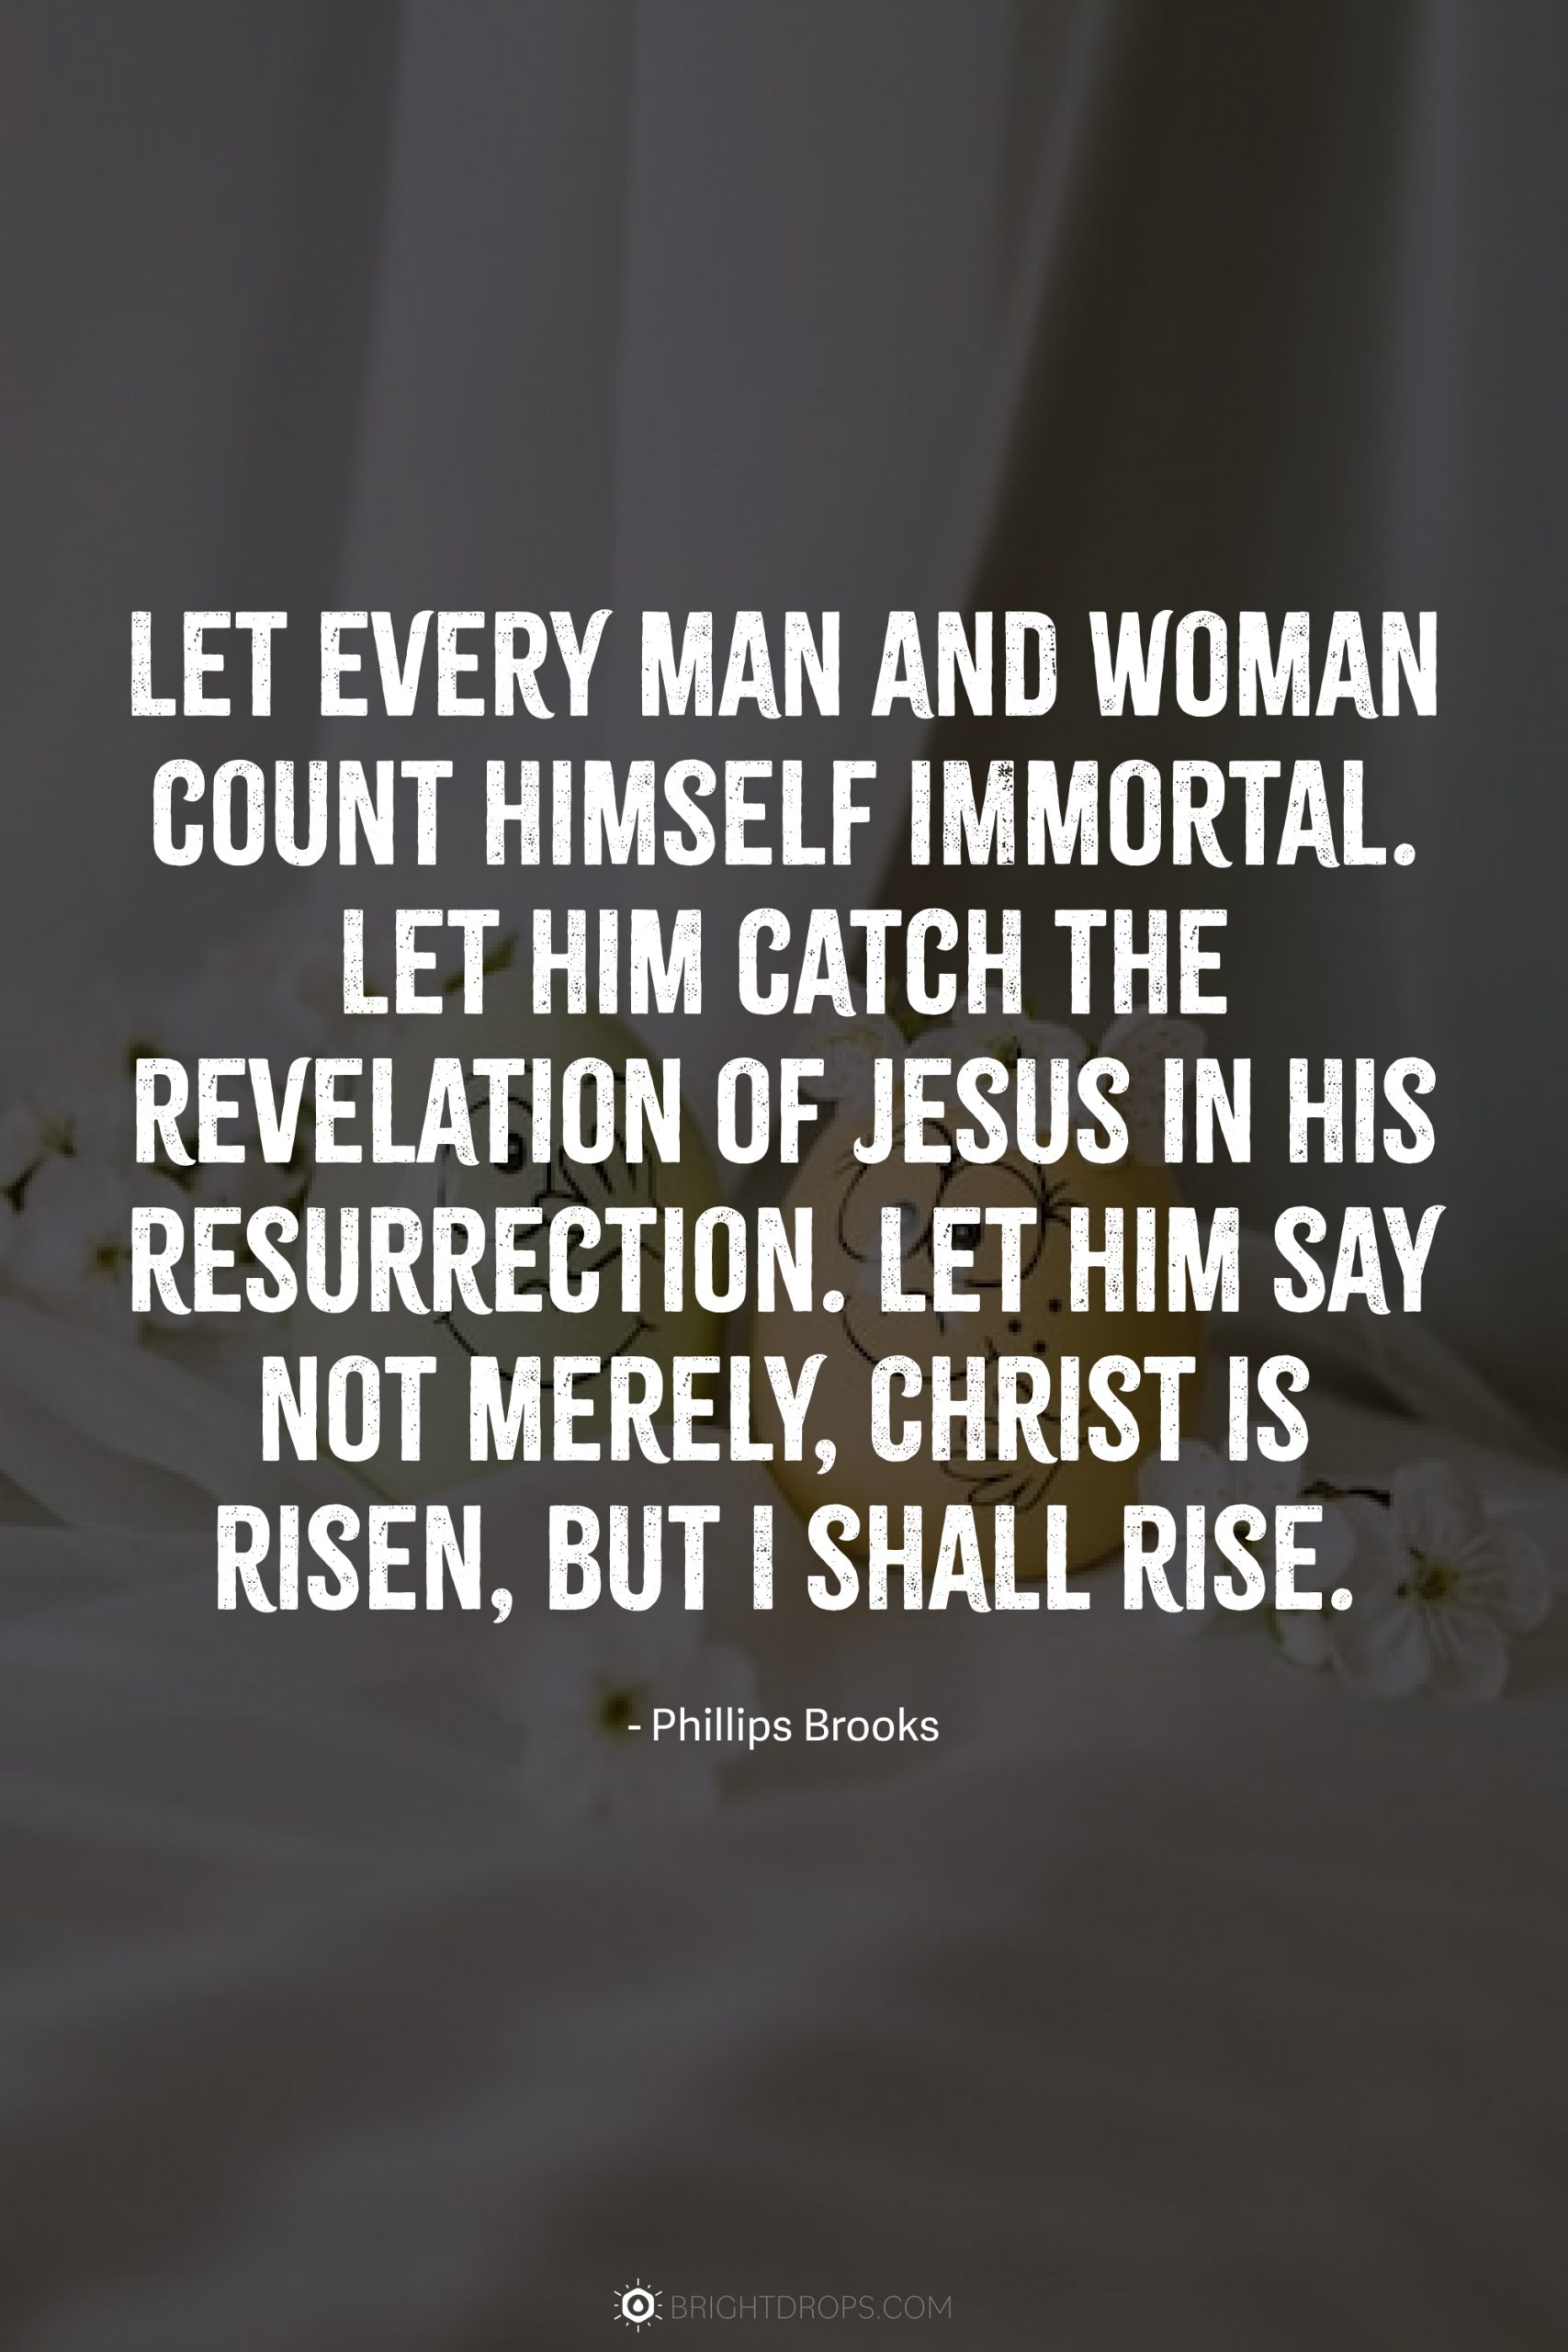 Let every man and woman count himself immortal. Let him catch the revelation of Jesus in his resurrection. Let him say not merely, Christ is risen, but I shall rise.